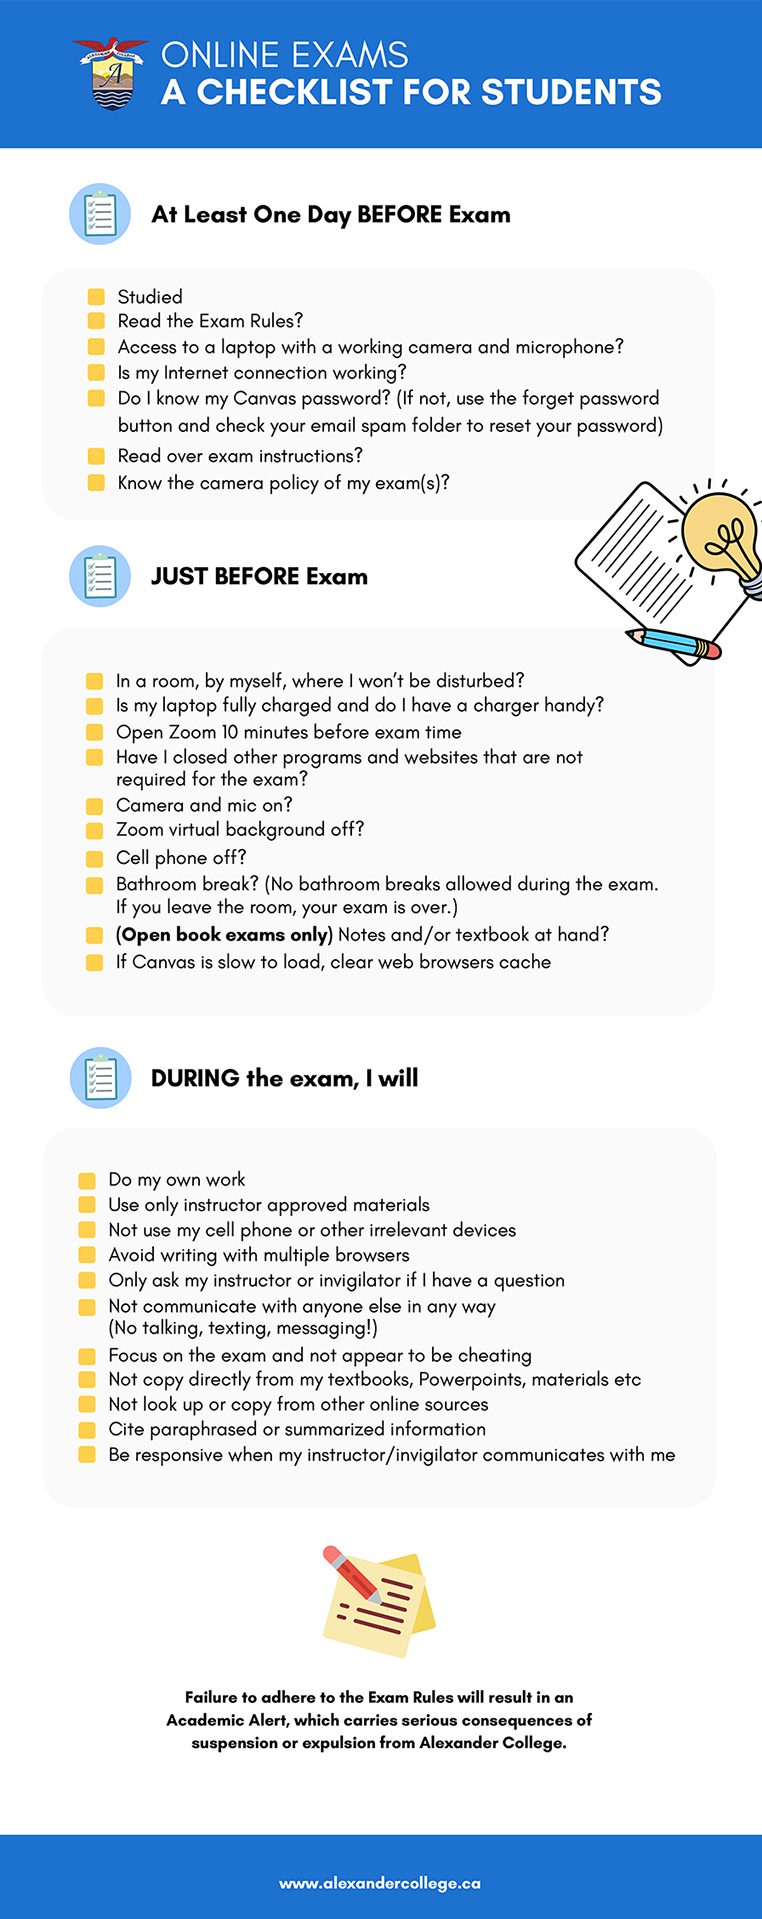 Online Exam Checklist for Students